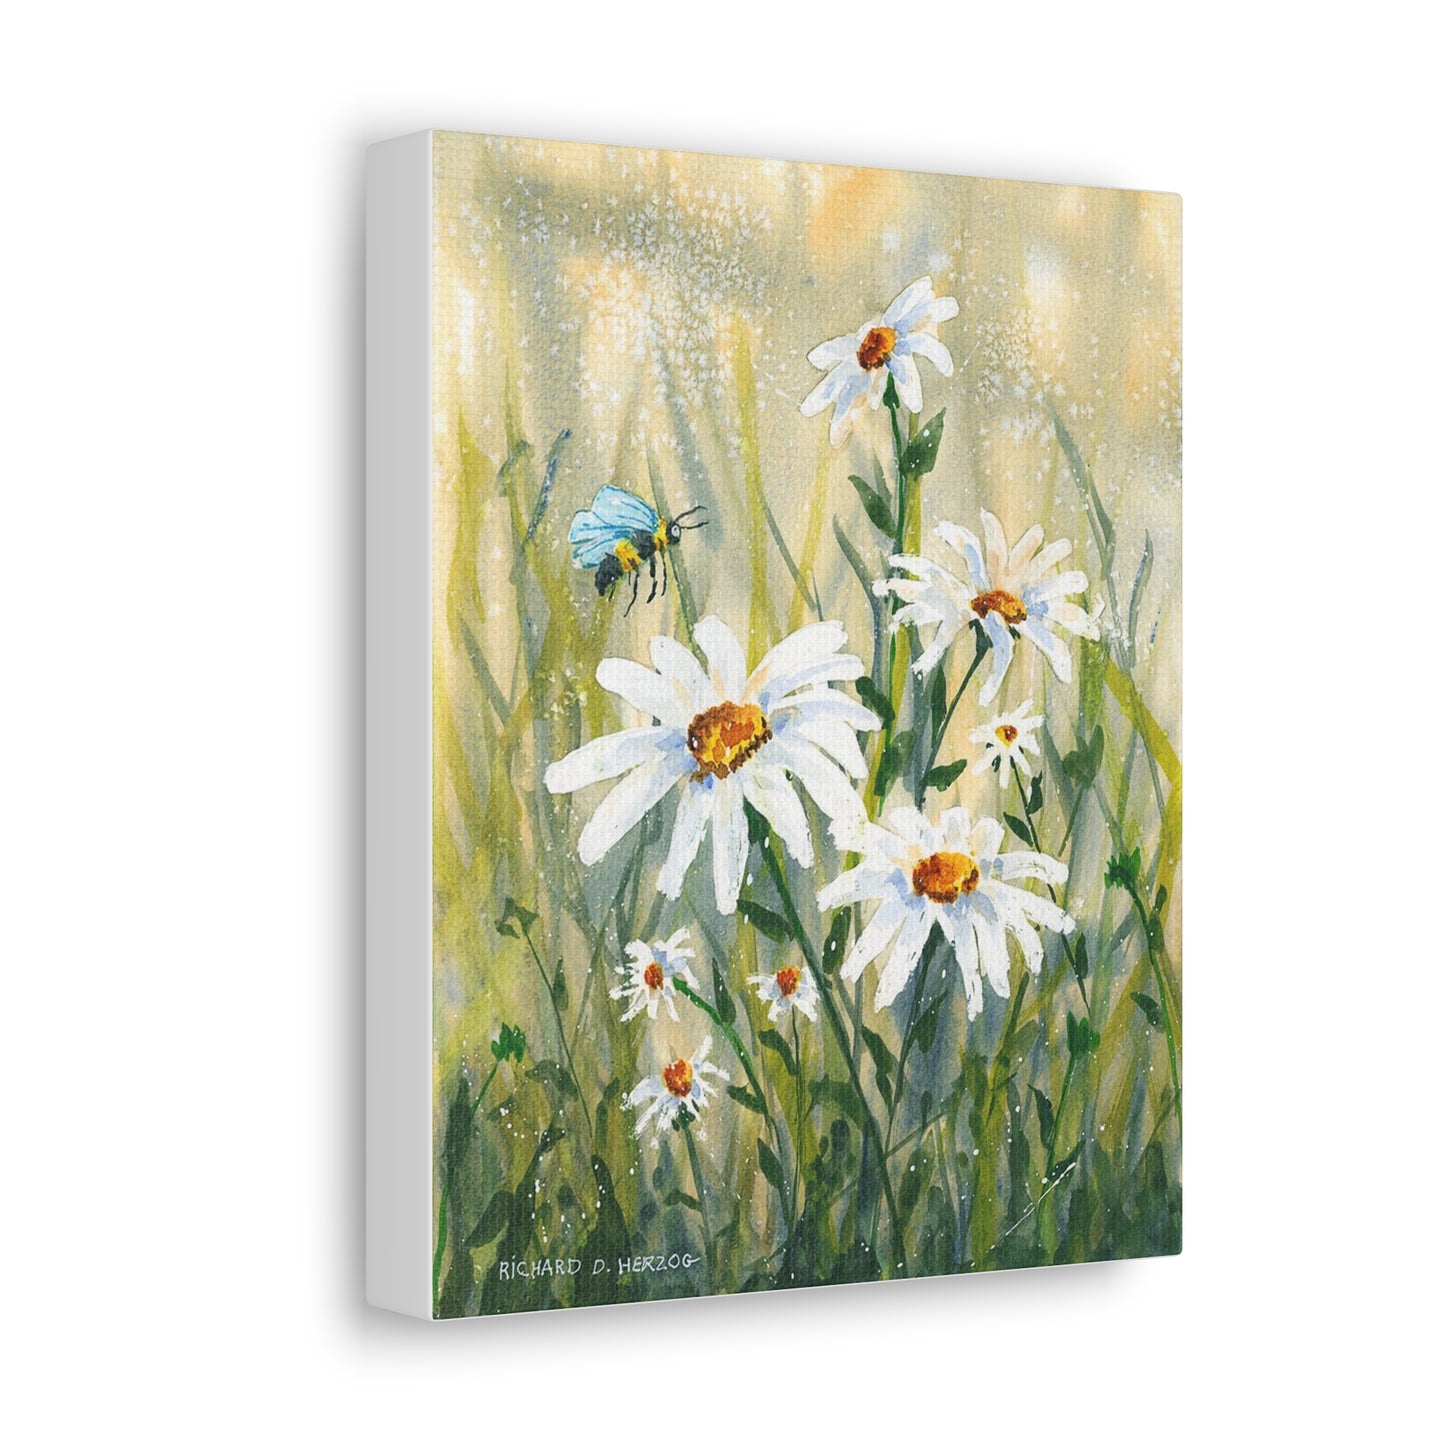 Daisies And Bee Canvas Print